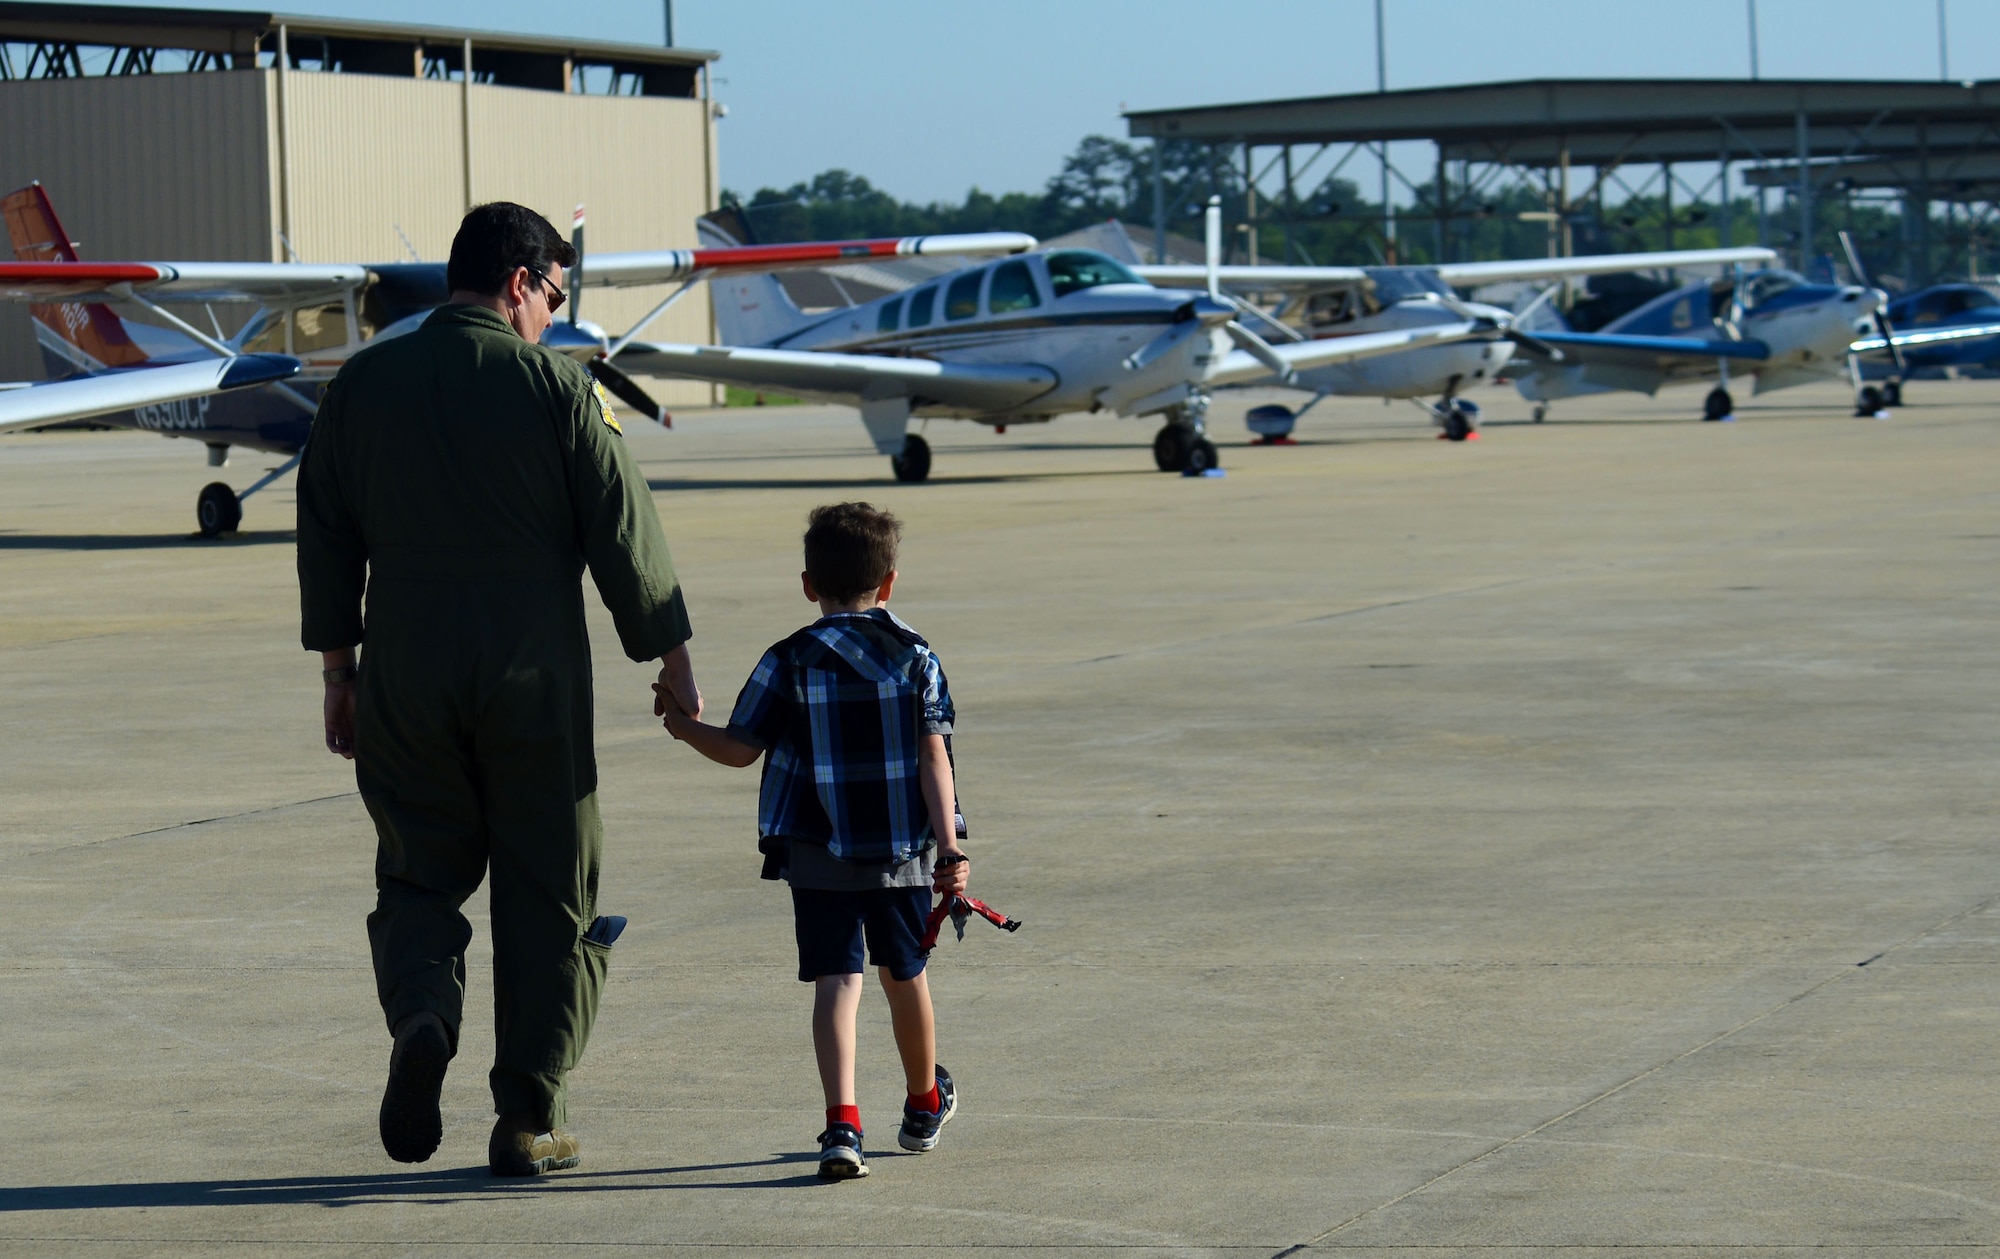 U.S. Air Force Lt. Col. Kris Padilla, 20th Fighter Wing chief of safety, and his son look at aircraft on the flight line at Shaw Air Force Base, S.C., April 29, 2016. Seventy-nine civilian aircraft and more than 100 people participated in Shaw’s first General Aviation Fly-In since 1977. (U.S. Air Force photo by Airman 1st Class Kelsey Tucker)